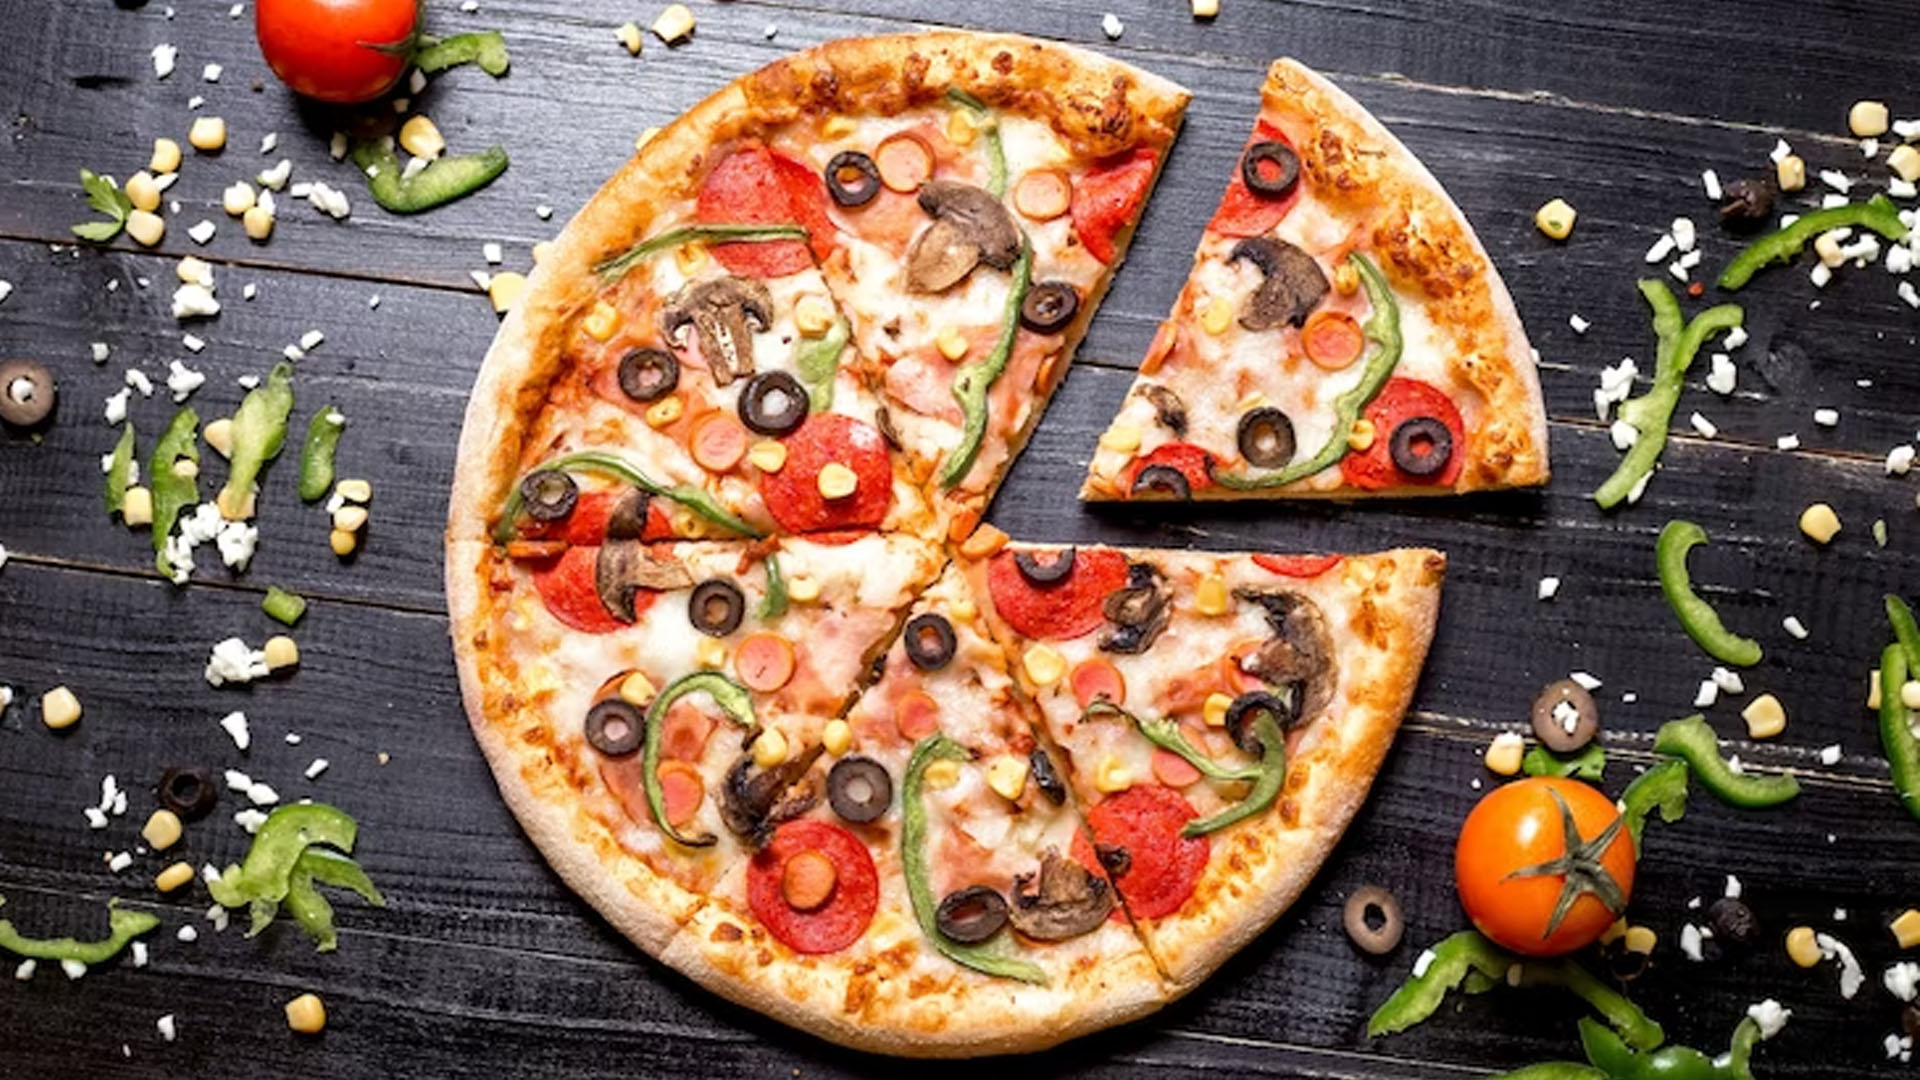 What Are The Health Benefits of Pizzas?